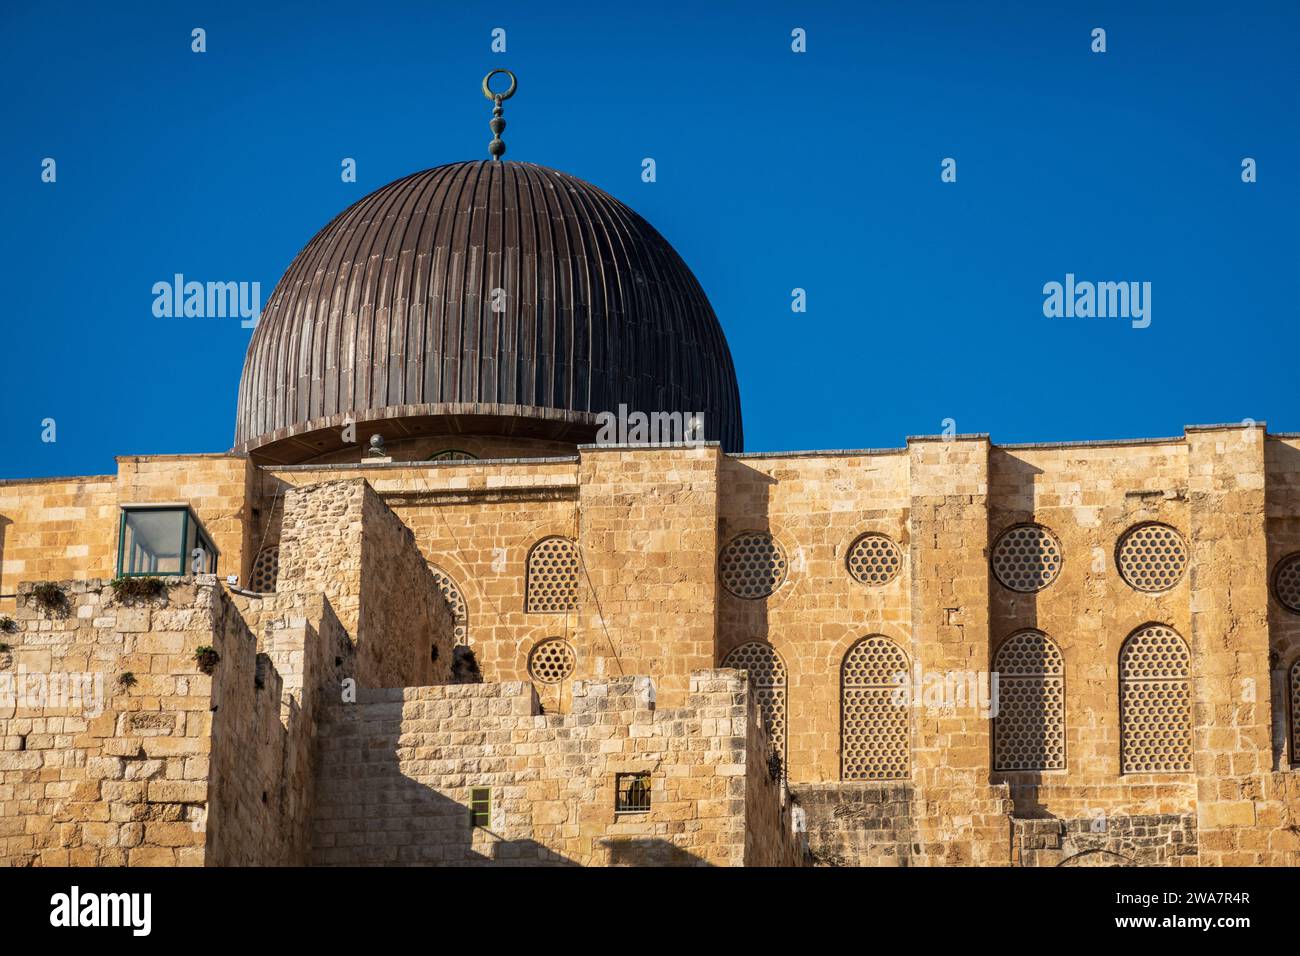 Al-Aqsa Mosque seen from the Western Wall under blue sky, Jerusalem, Israel Stock Photo